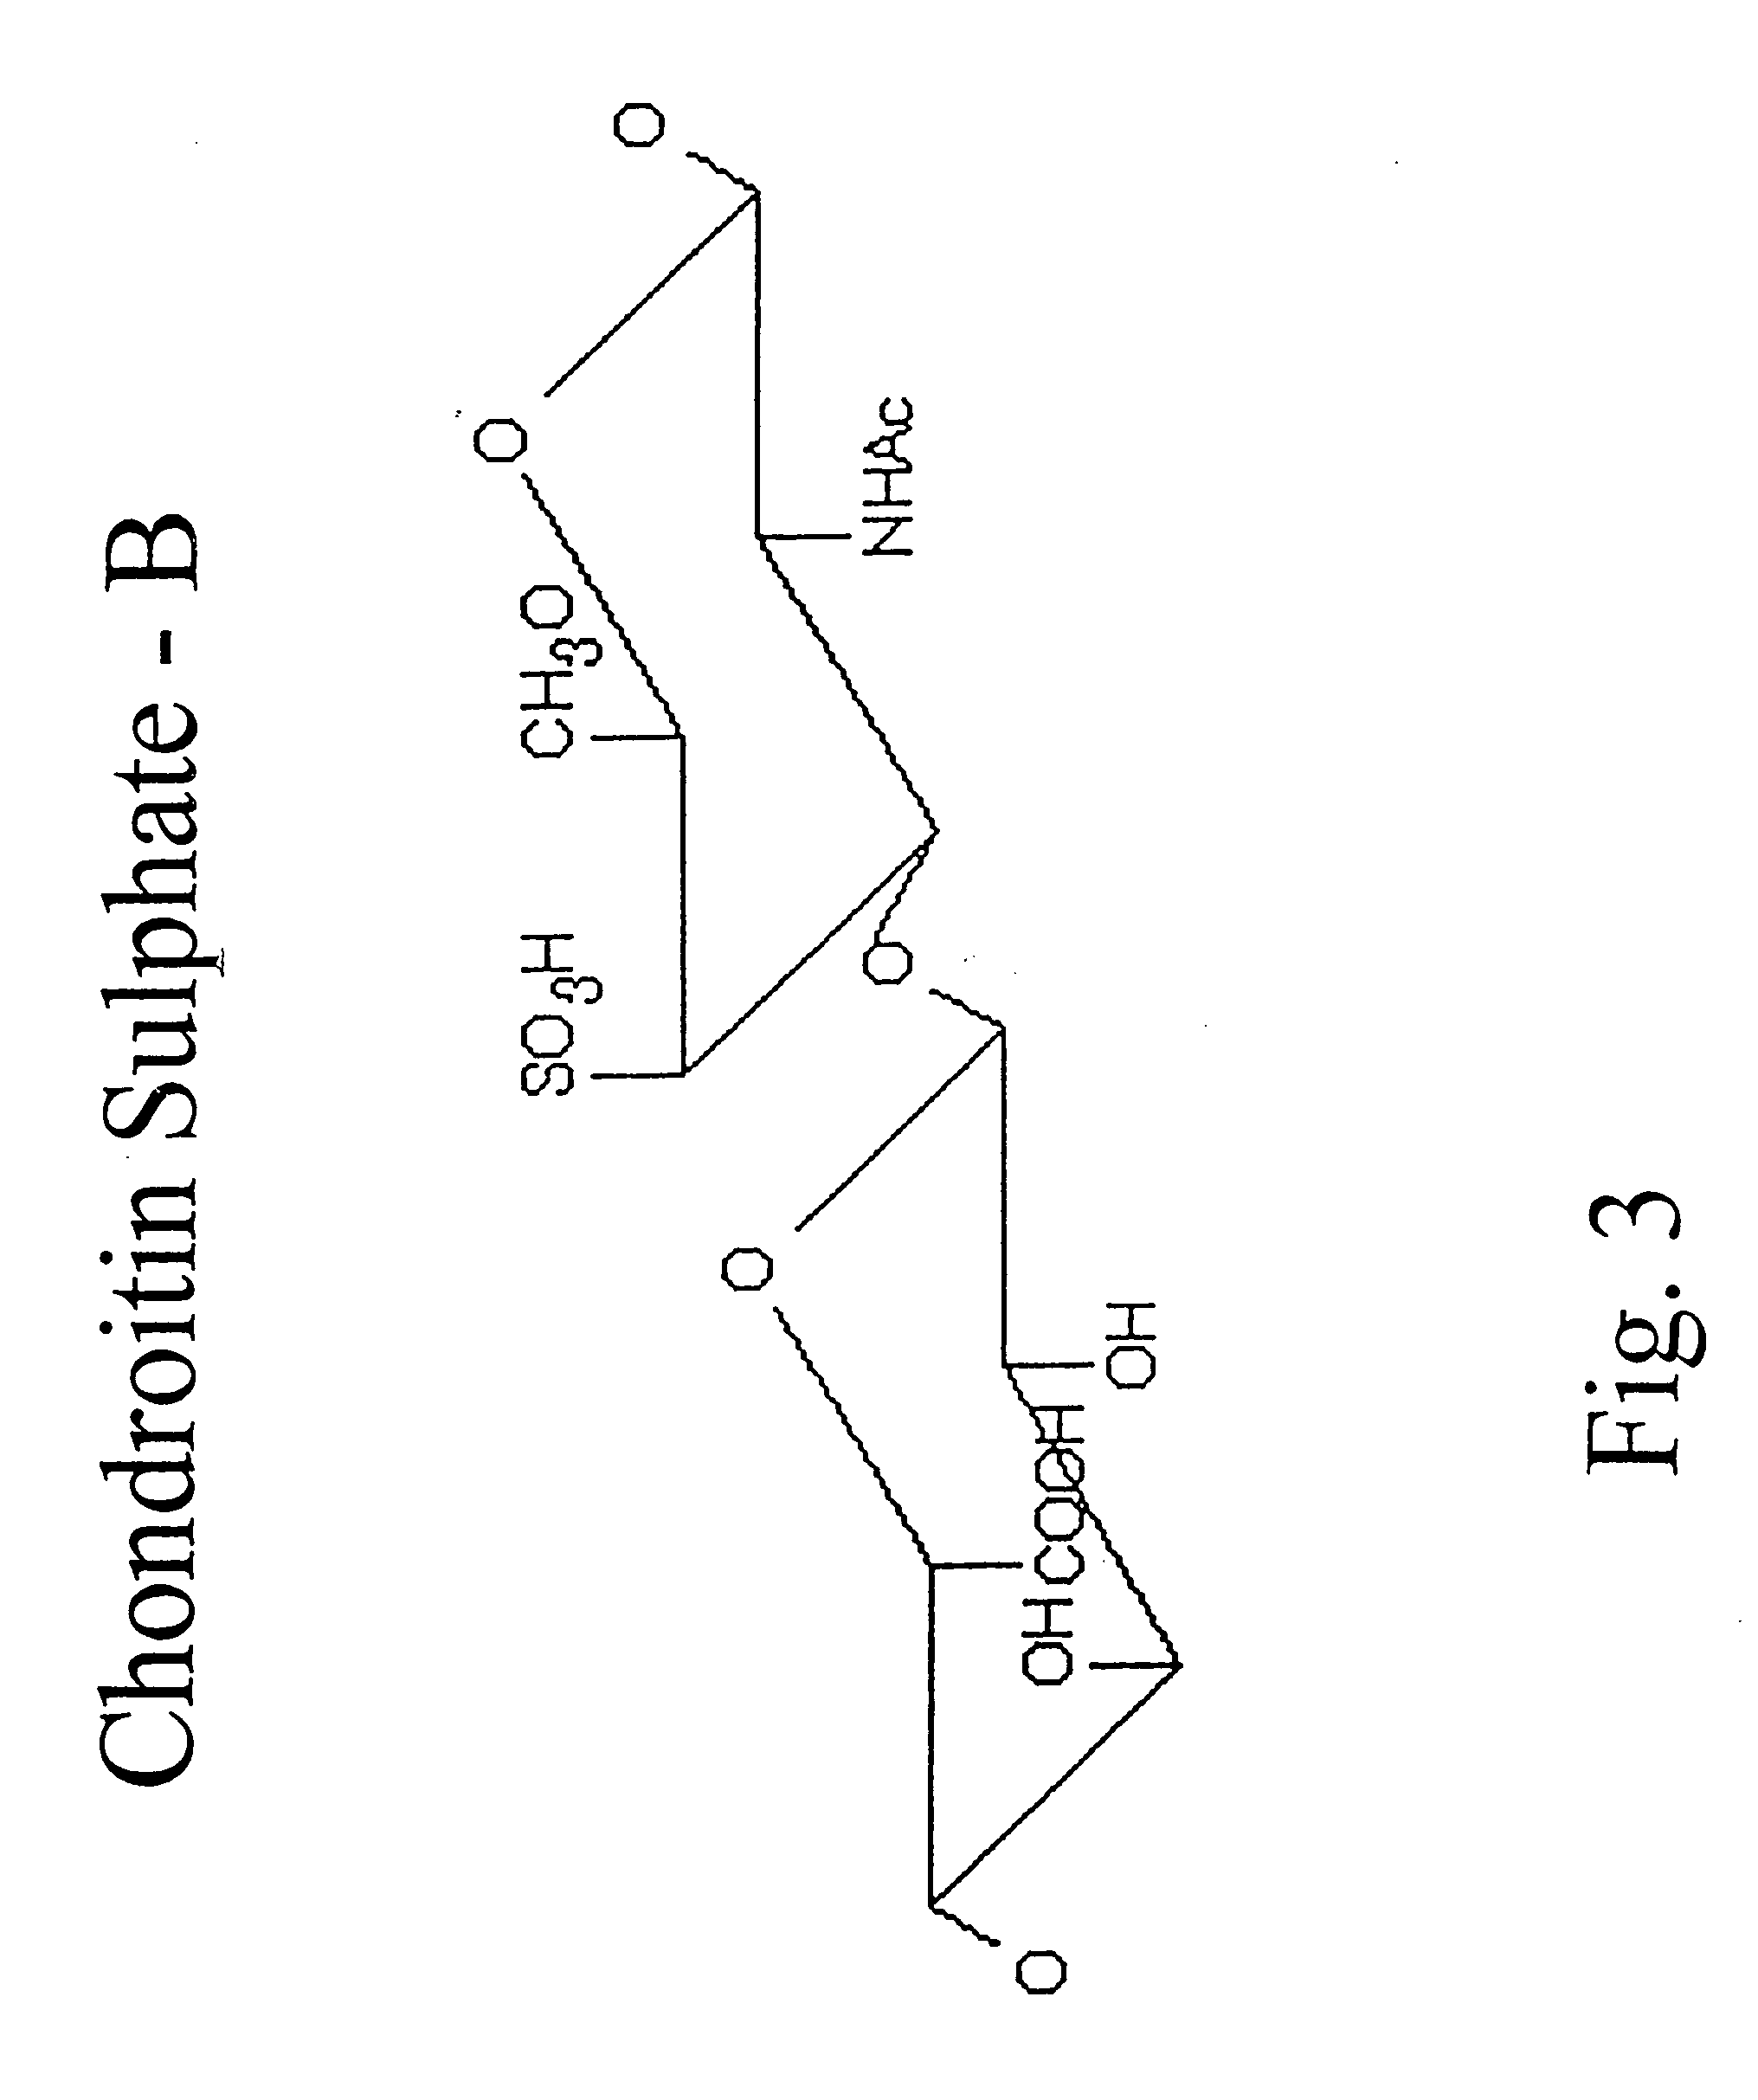 Hyaluronic acid and chondroitin sulfate based hydrolyzed collagen type II and method of making same